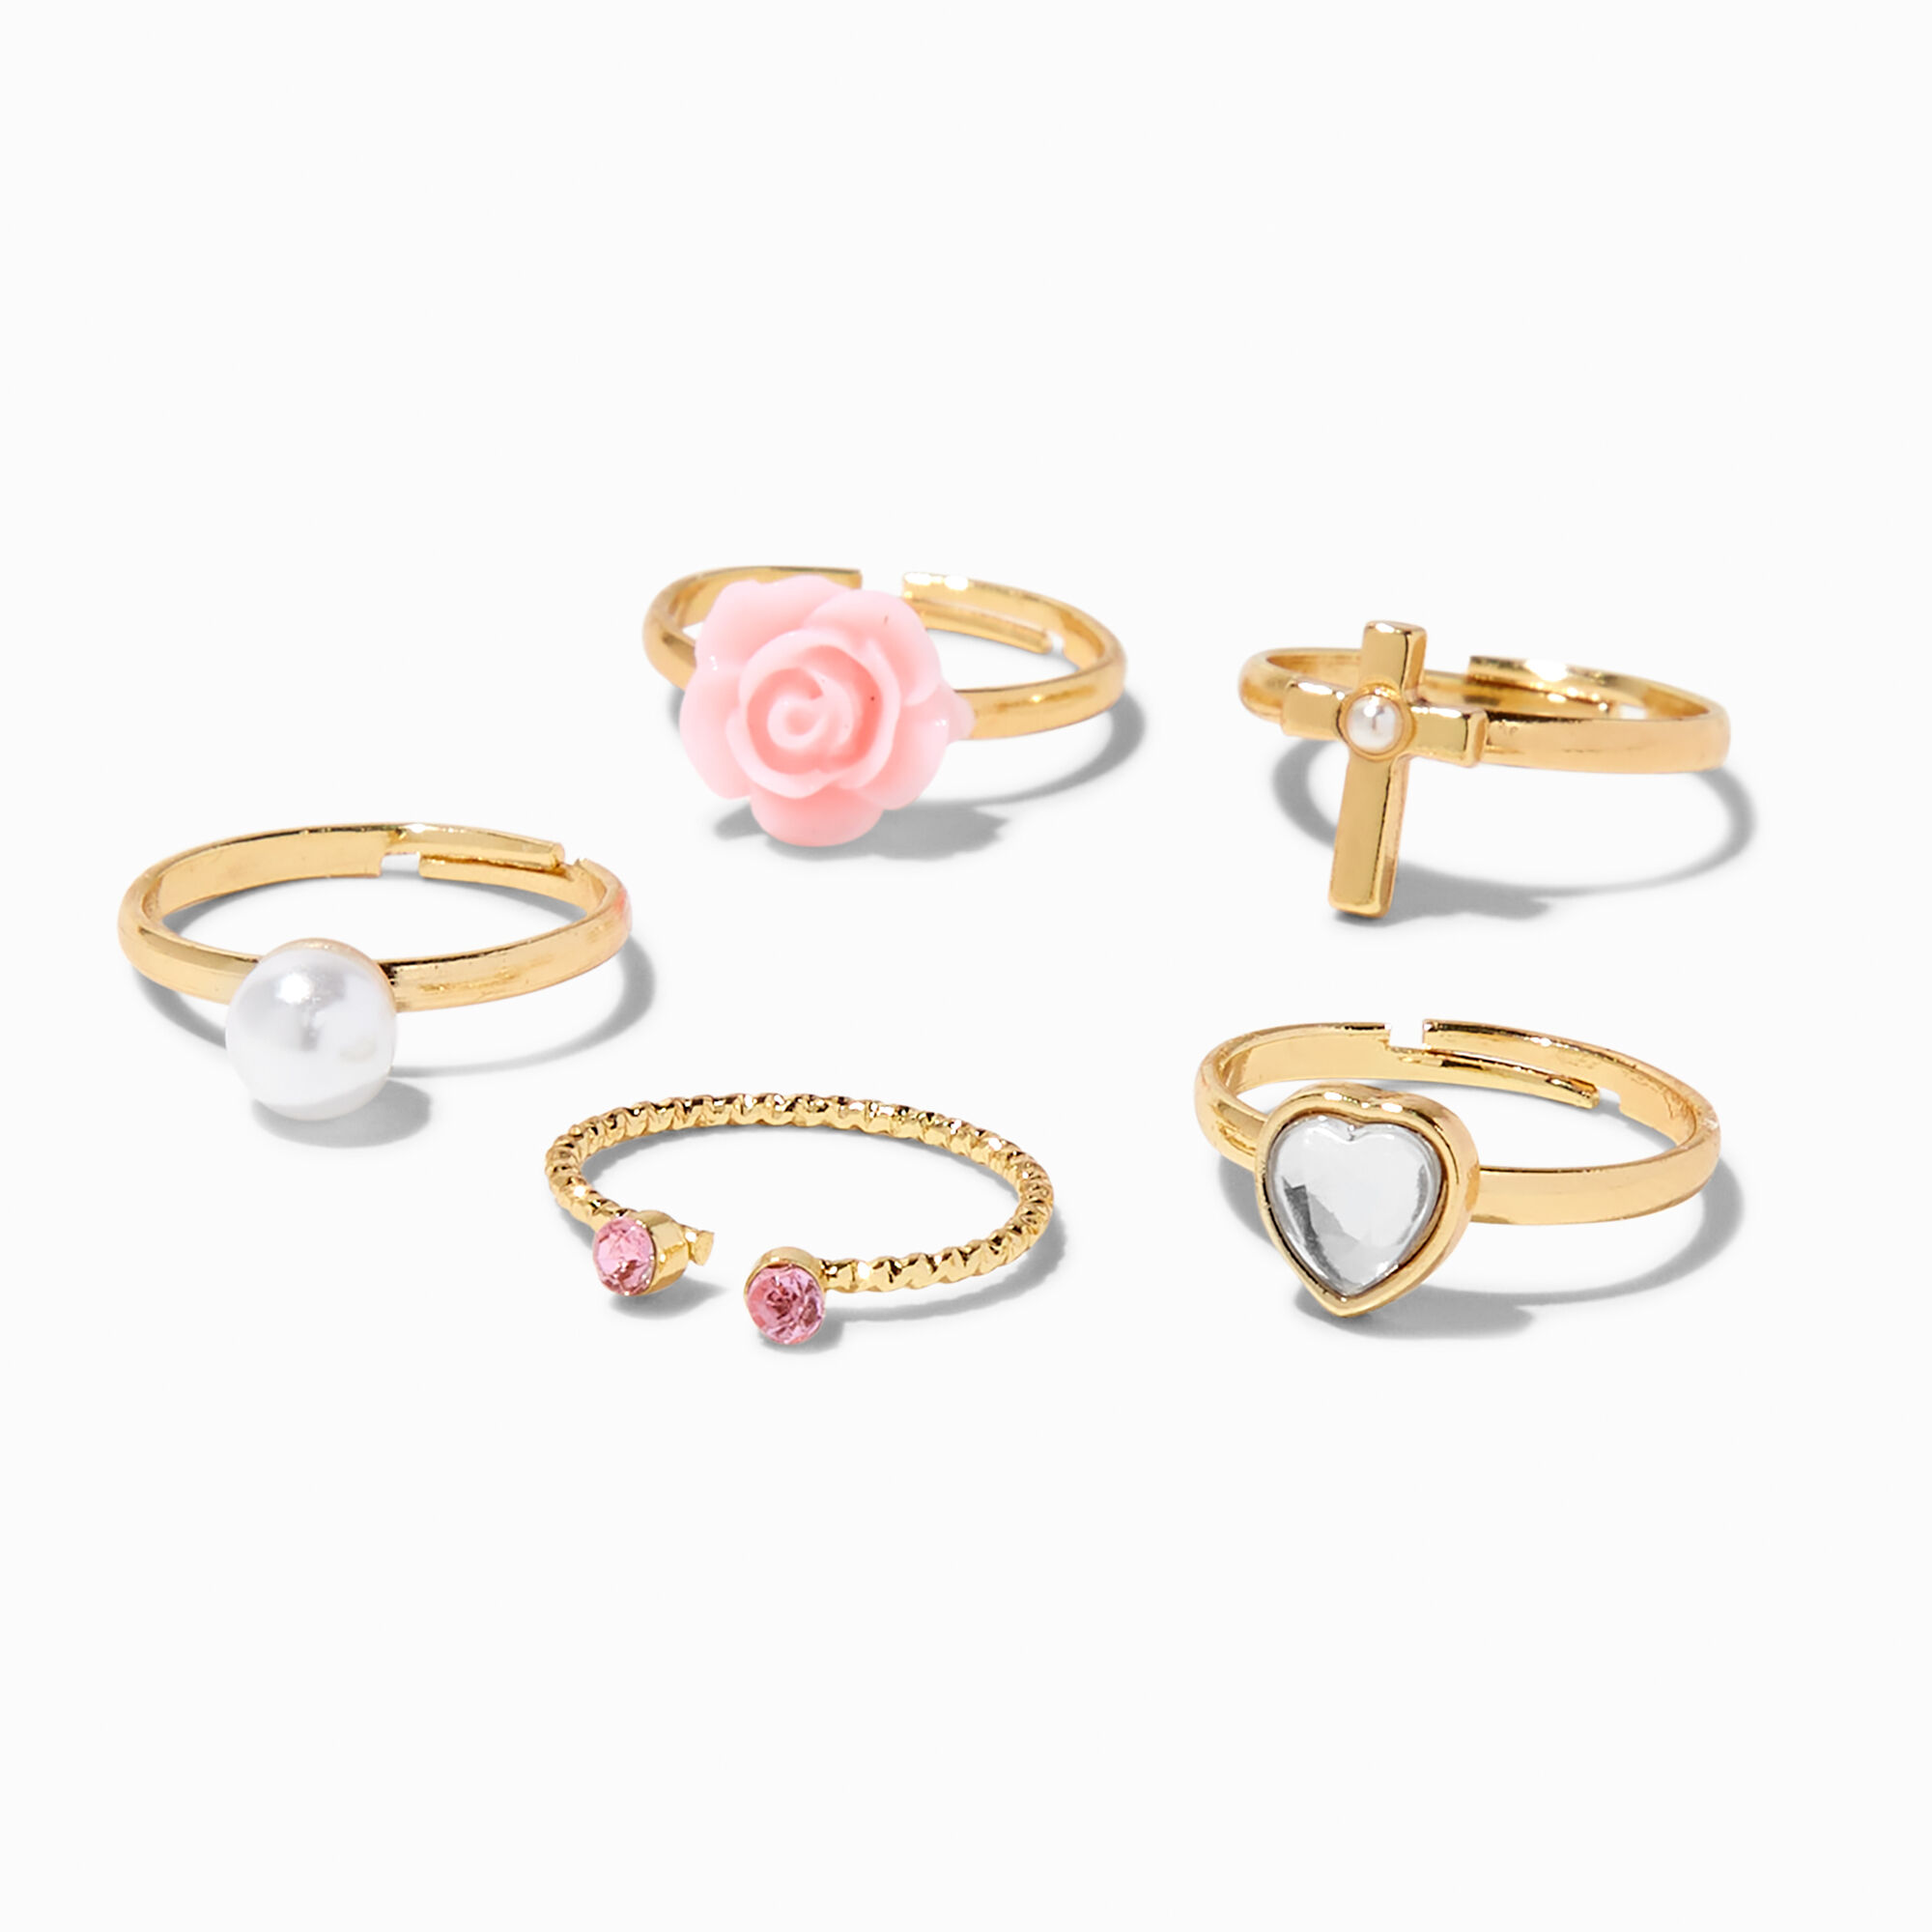 Fashion Brand Rings Women Lady Ring Jewelry Gold Alloy Finger Tip Stacking  Rings F21 Rings For Short Fingers KNUCKLE RING Jewellry Accessories From  Worldfashionoutlet, $0.91 | DHgate.Com